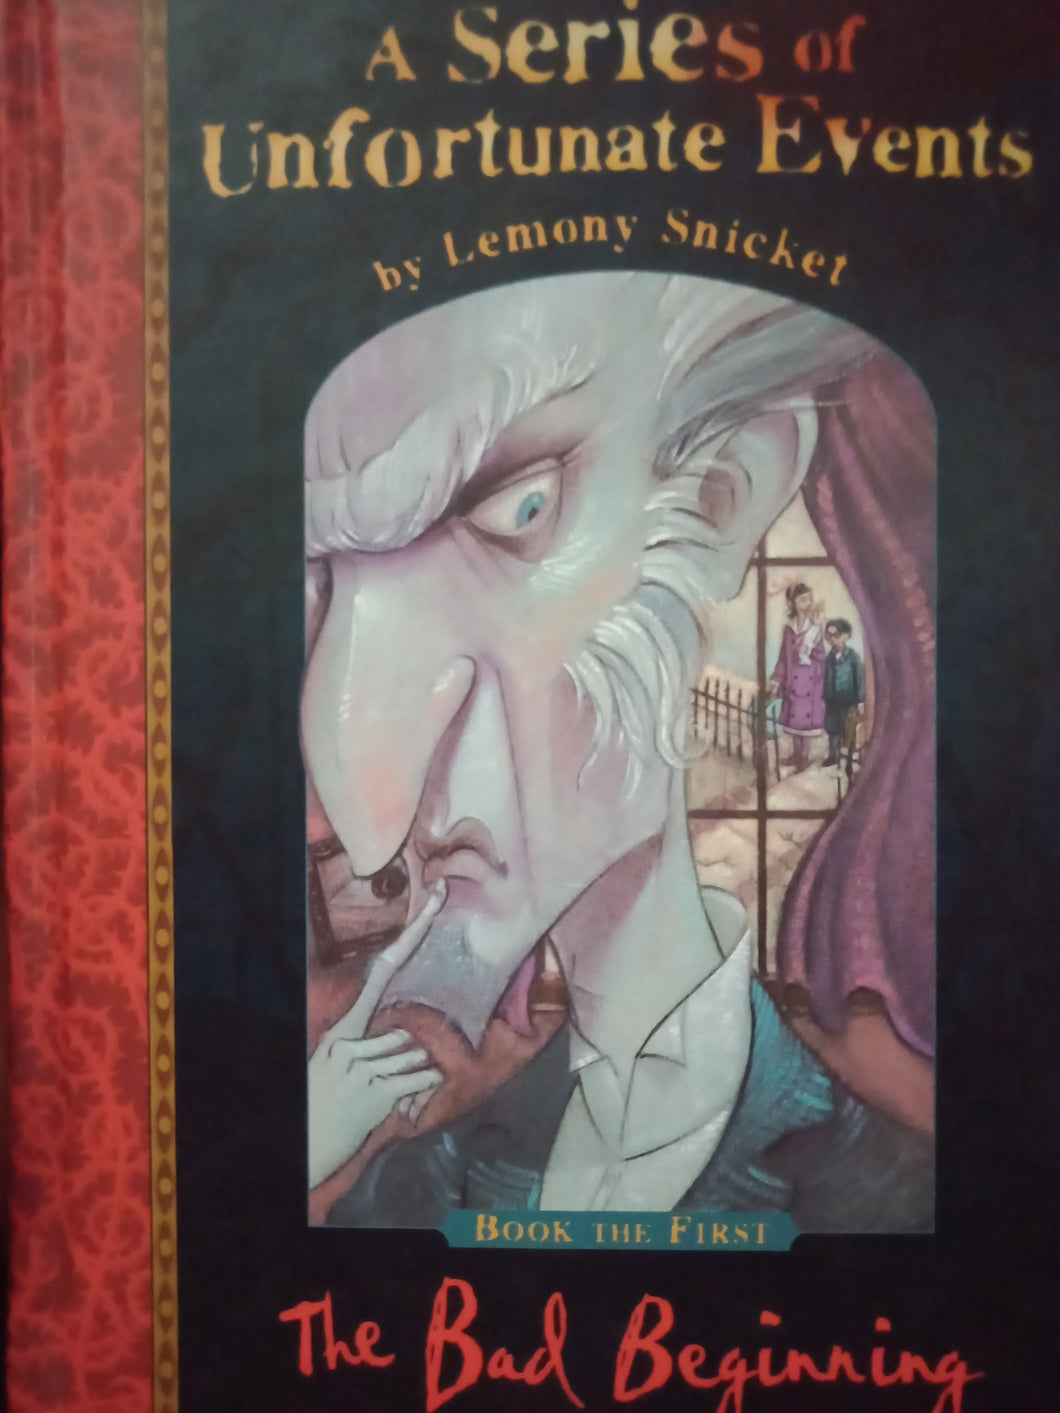 A Series Of Unfortunate Events: The Bad Beginning by Lemony Snicket